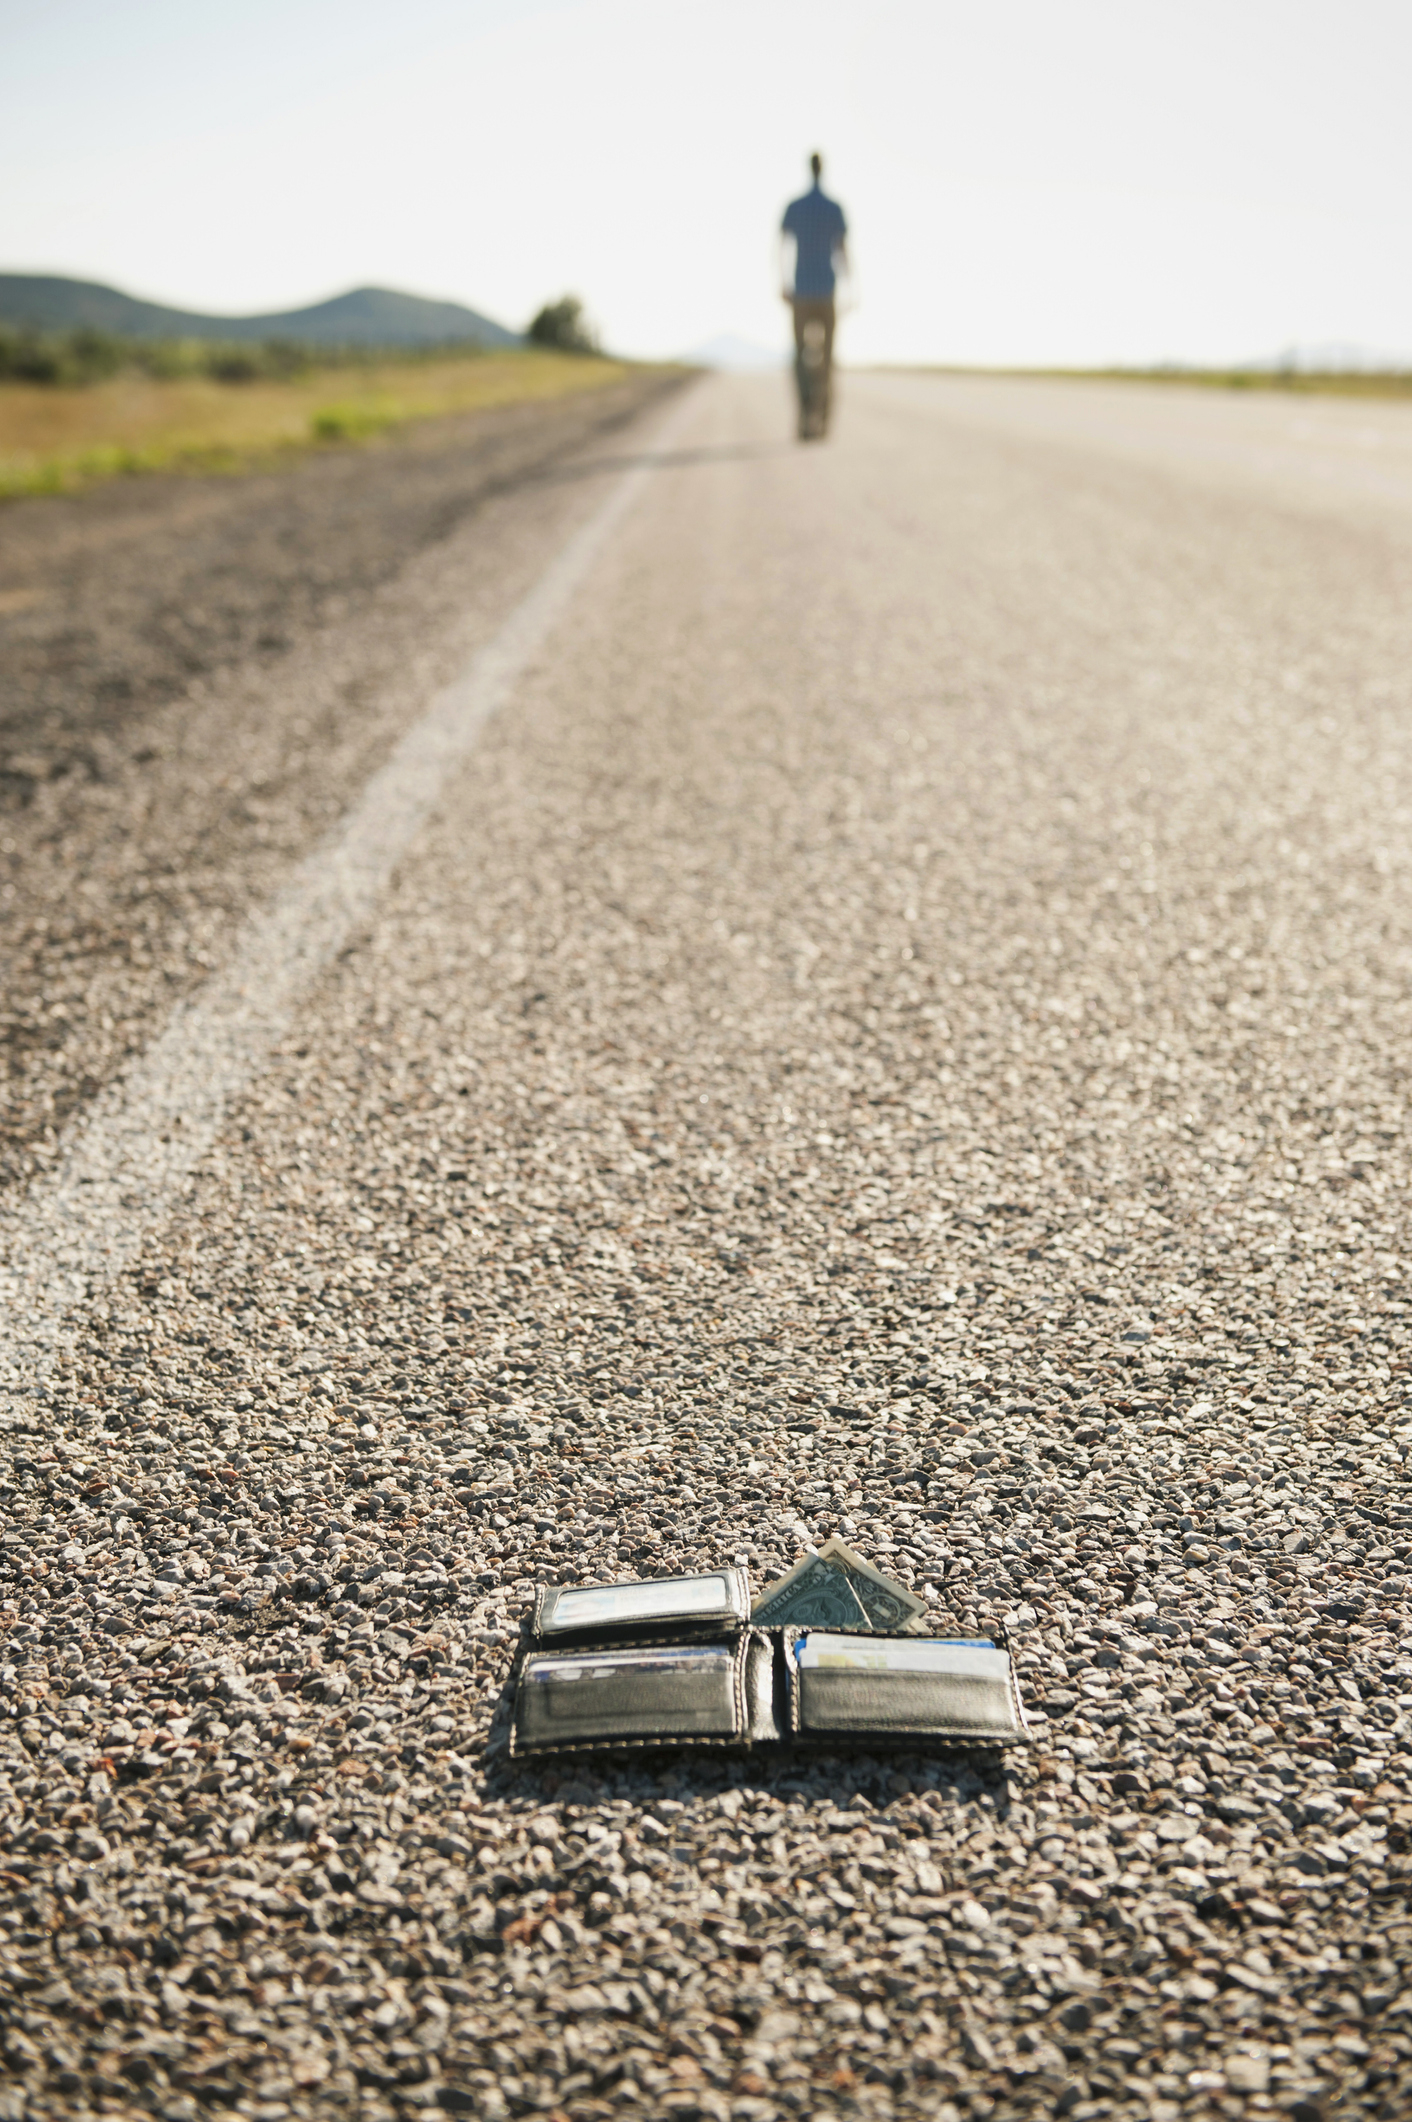 A wallet lies on a road with a blurred person walking away in the distance